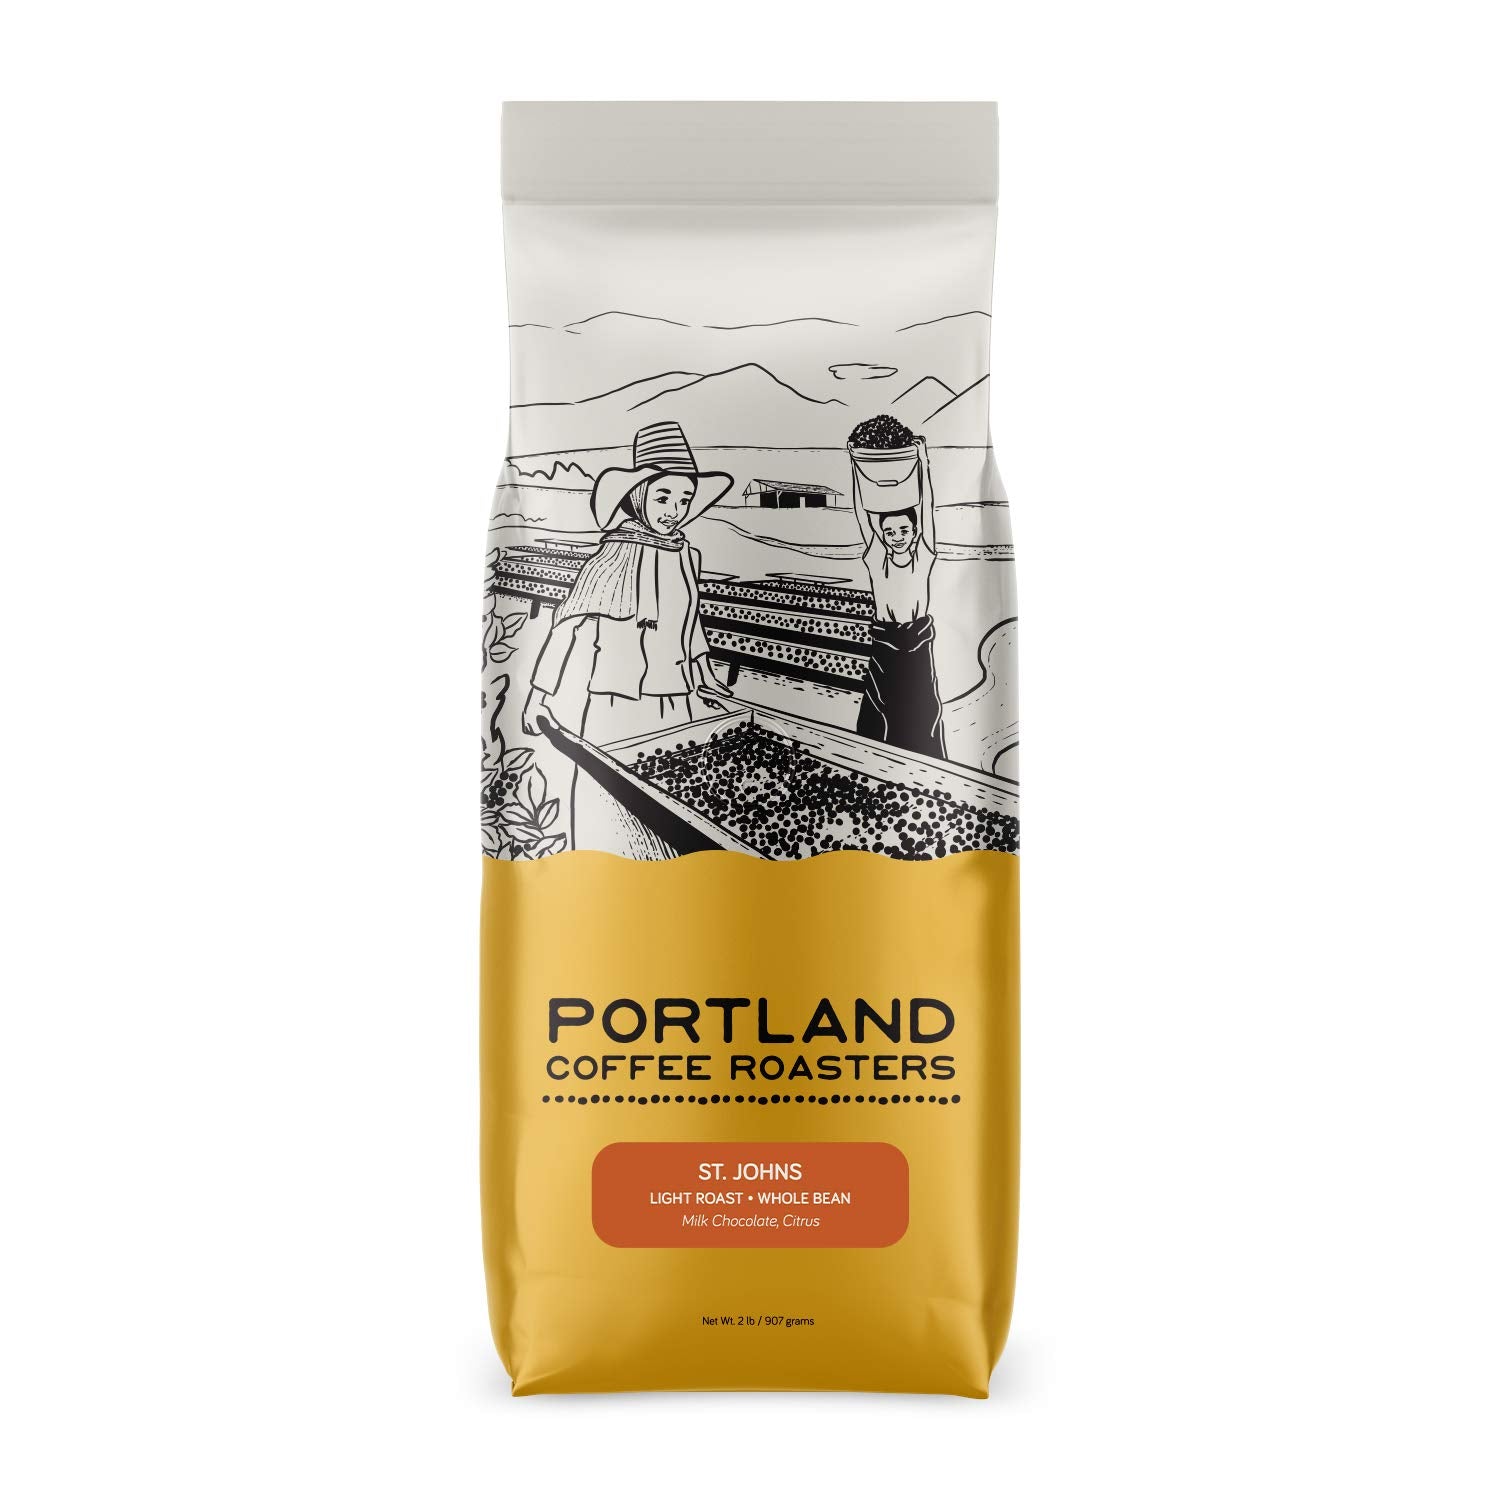 St Johns Espresso Blend from Portland Coffee Roasters -WHOLE BEAN…